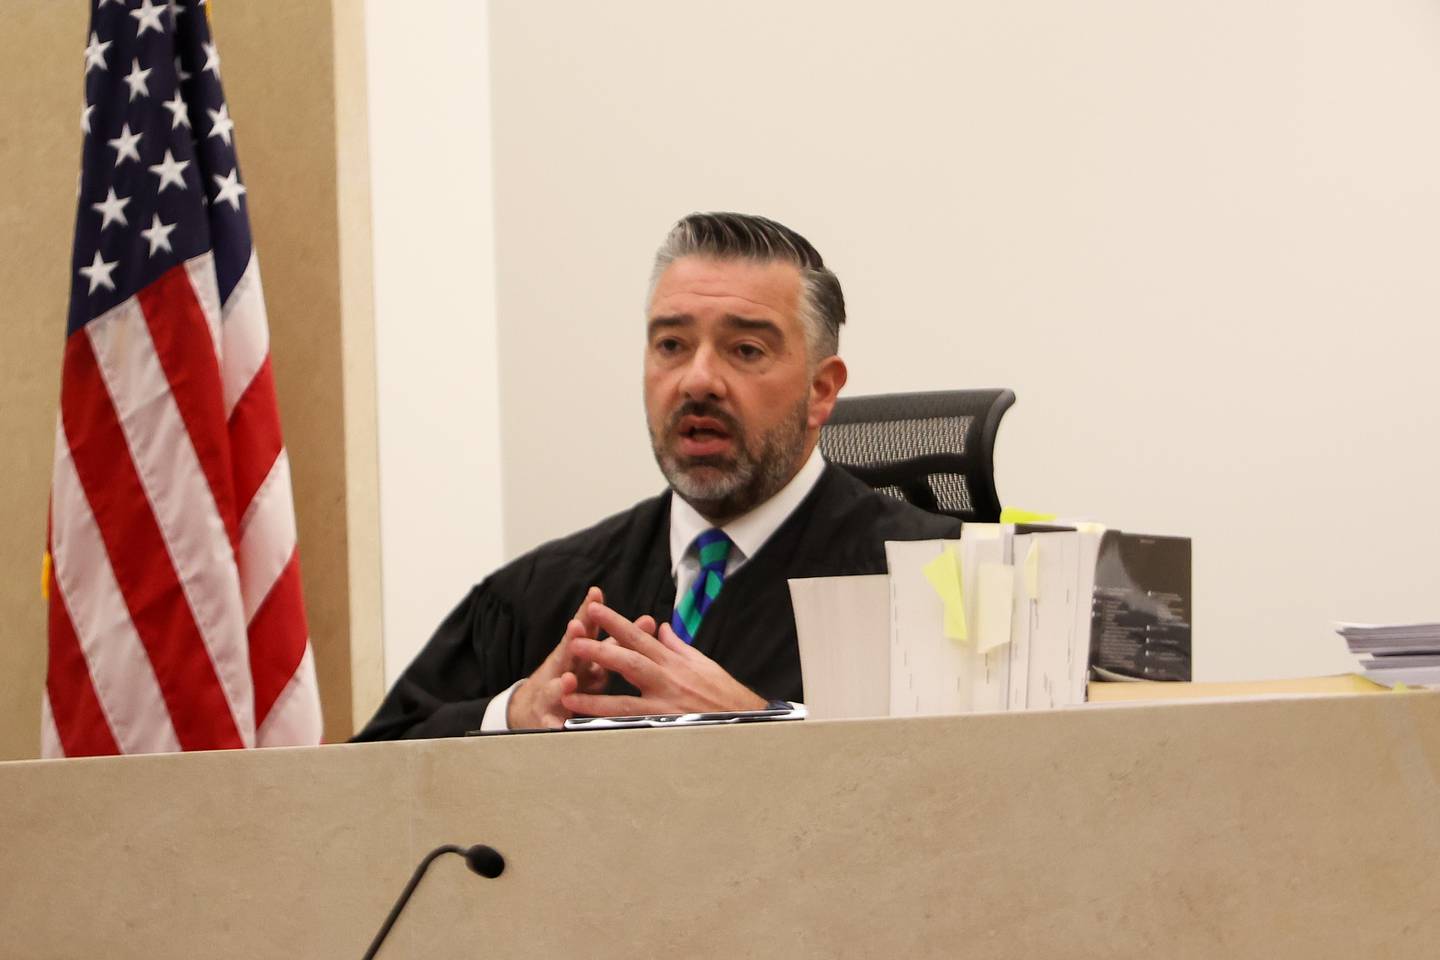 Judge Dave Carlson addresses the courtroom for the opening of the People vs. Jeremy Boshears trial. Boshears is charged with the murder of Kaitlyn “Katie” Kearns, 24, on Nov. 13, 2017. Thursday, April 14, 2022, in Joliet.